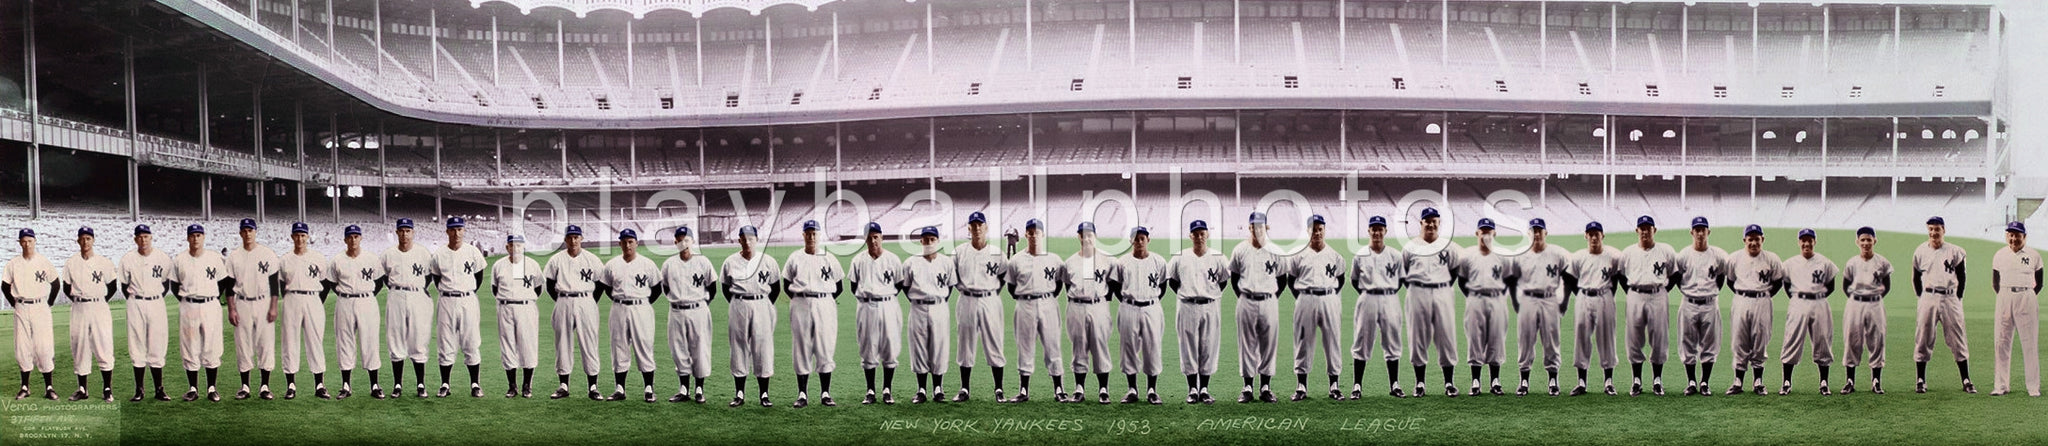 1953 New York Yankees Colorized Team 20"x4"